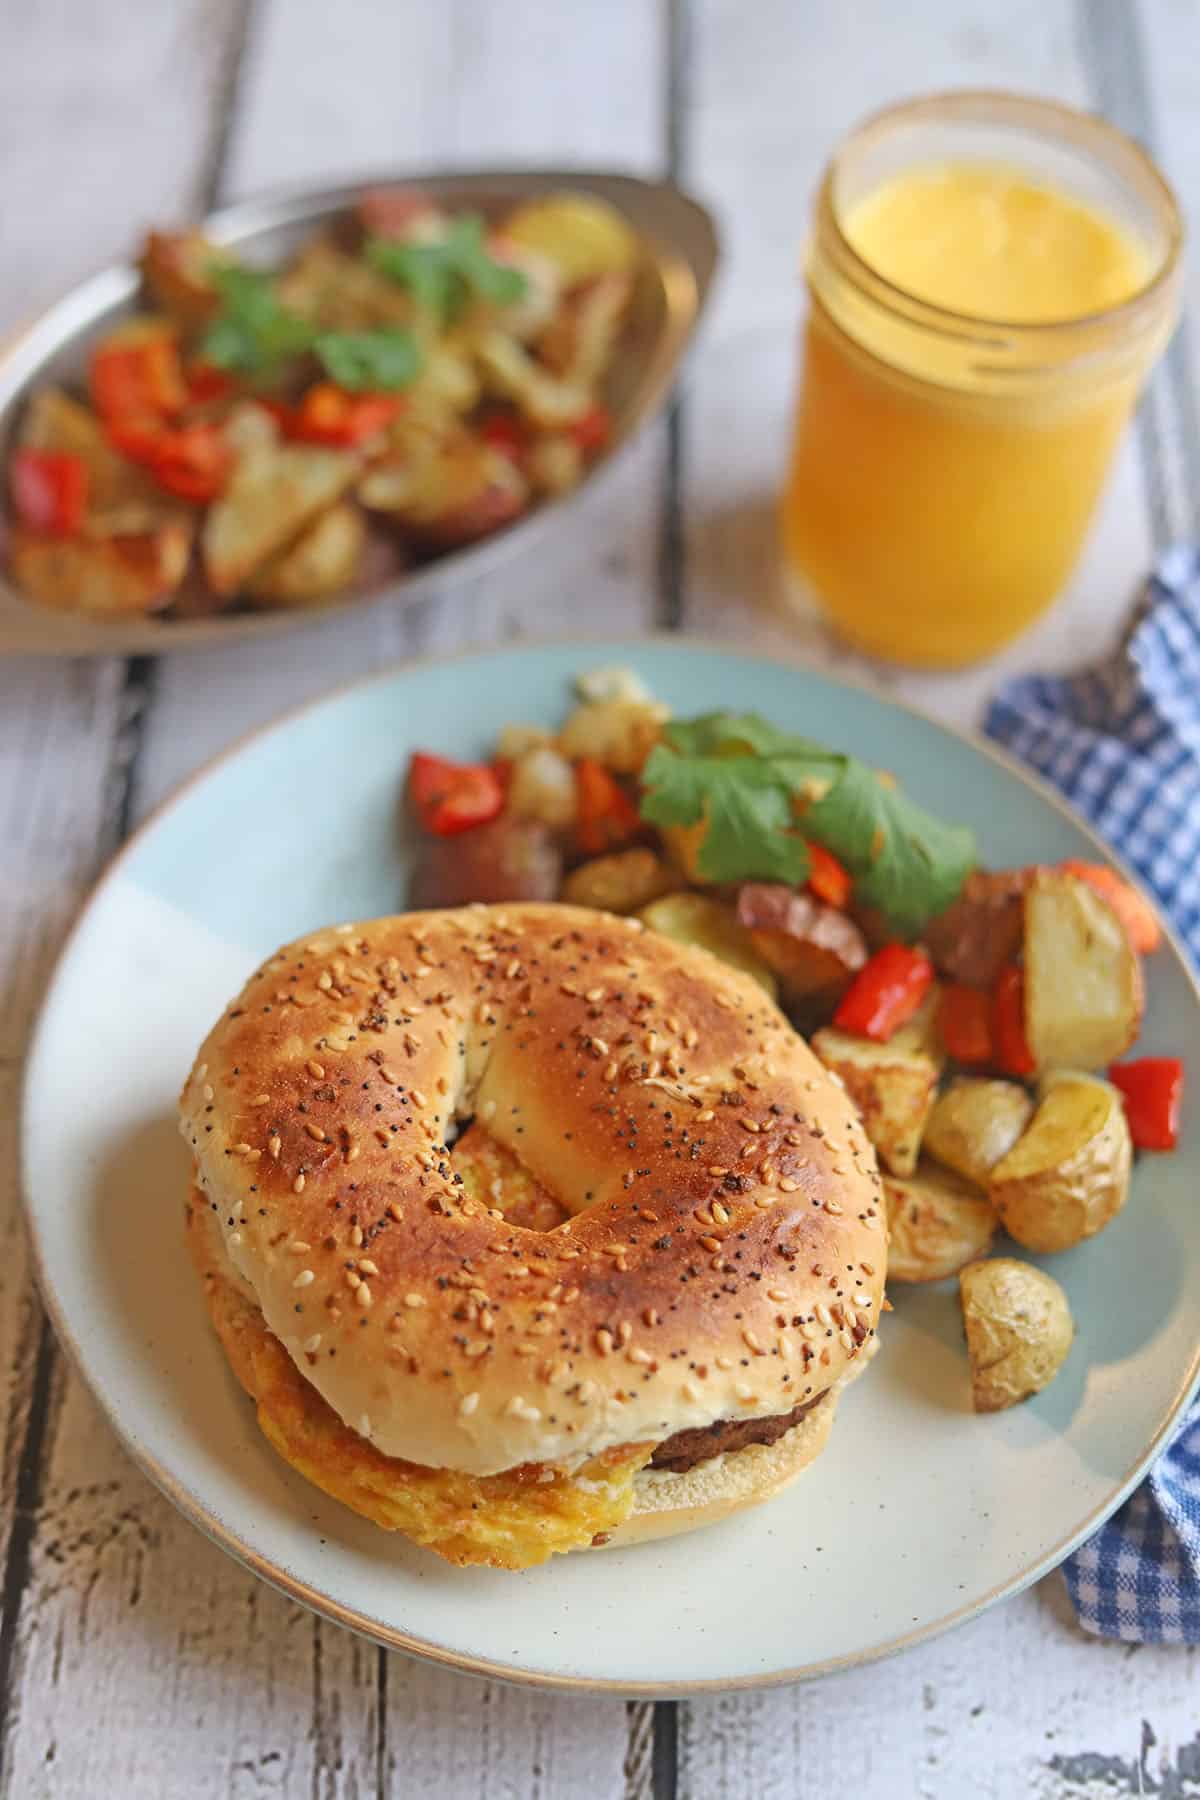 Bagel sandwich on plate with potato hash. On the side, a glass of orange juice.